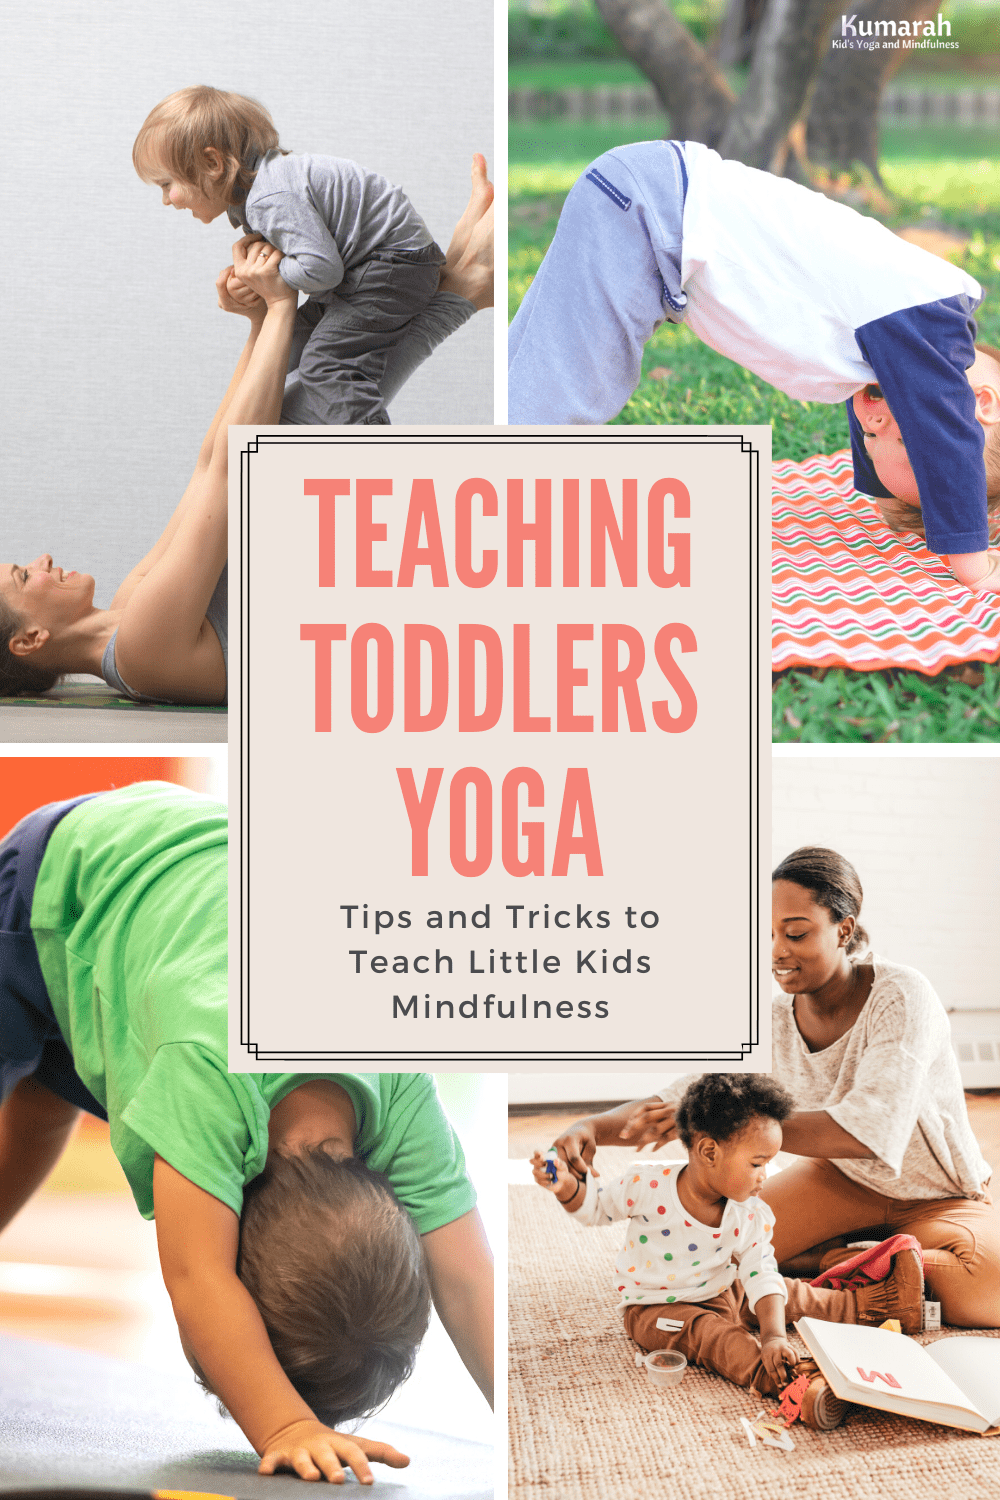 rockaway township library toddlers yoga class